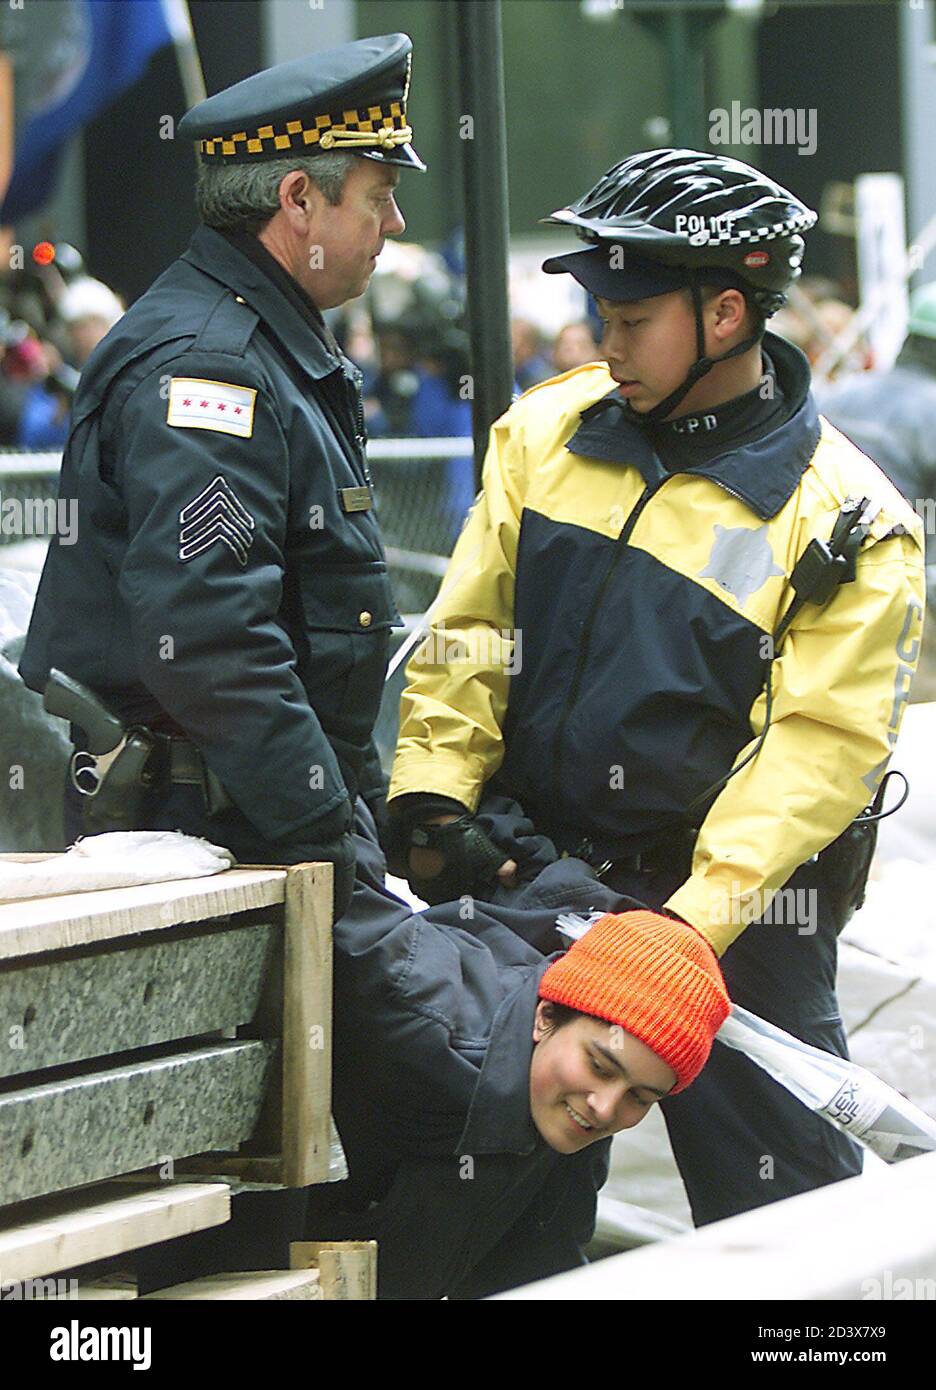 Two Chicago Police officers carry a handcuffed protester to a paddy wagon outside the Kluzcyinski Federal building in Chicago, March 21, 2003. Hundreds demonstrated against the war in Iraq. REUTERS/Frank Polich  FJP/GN Stock Photo